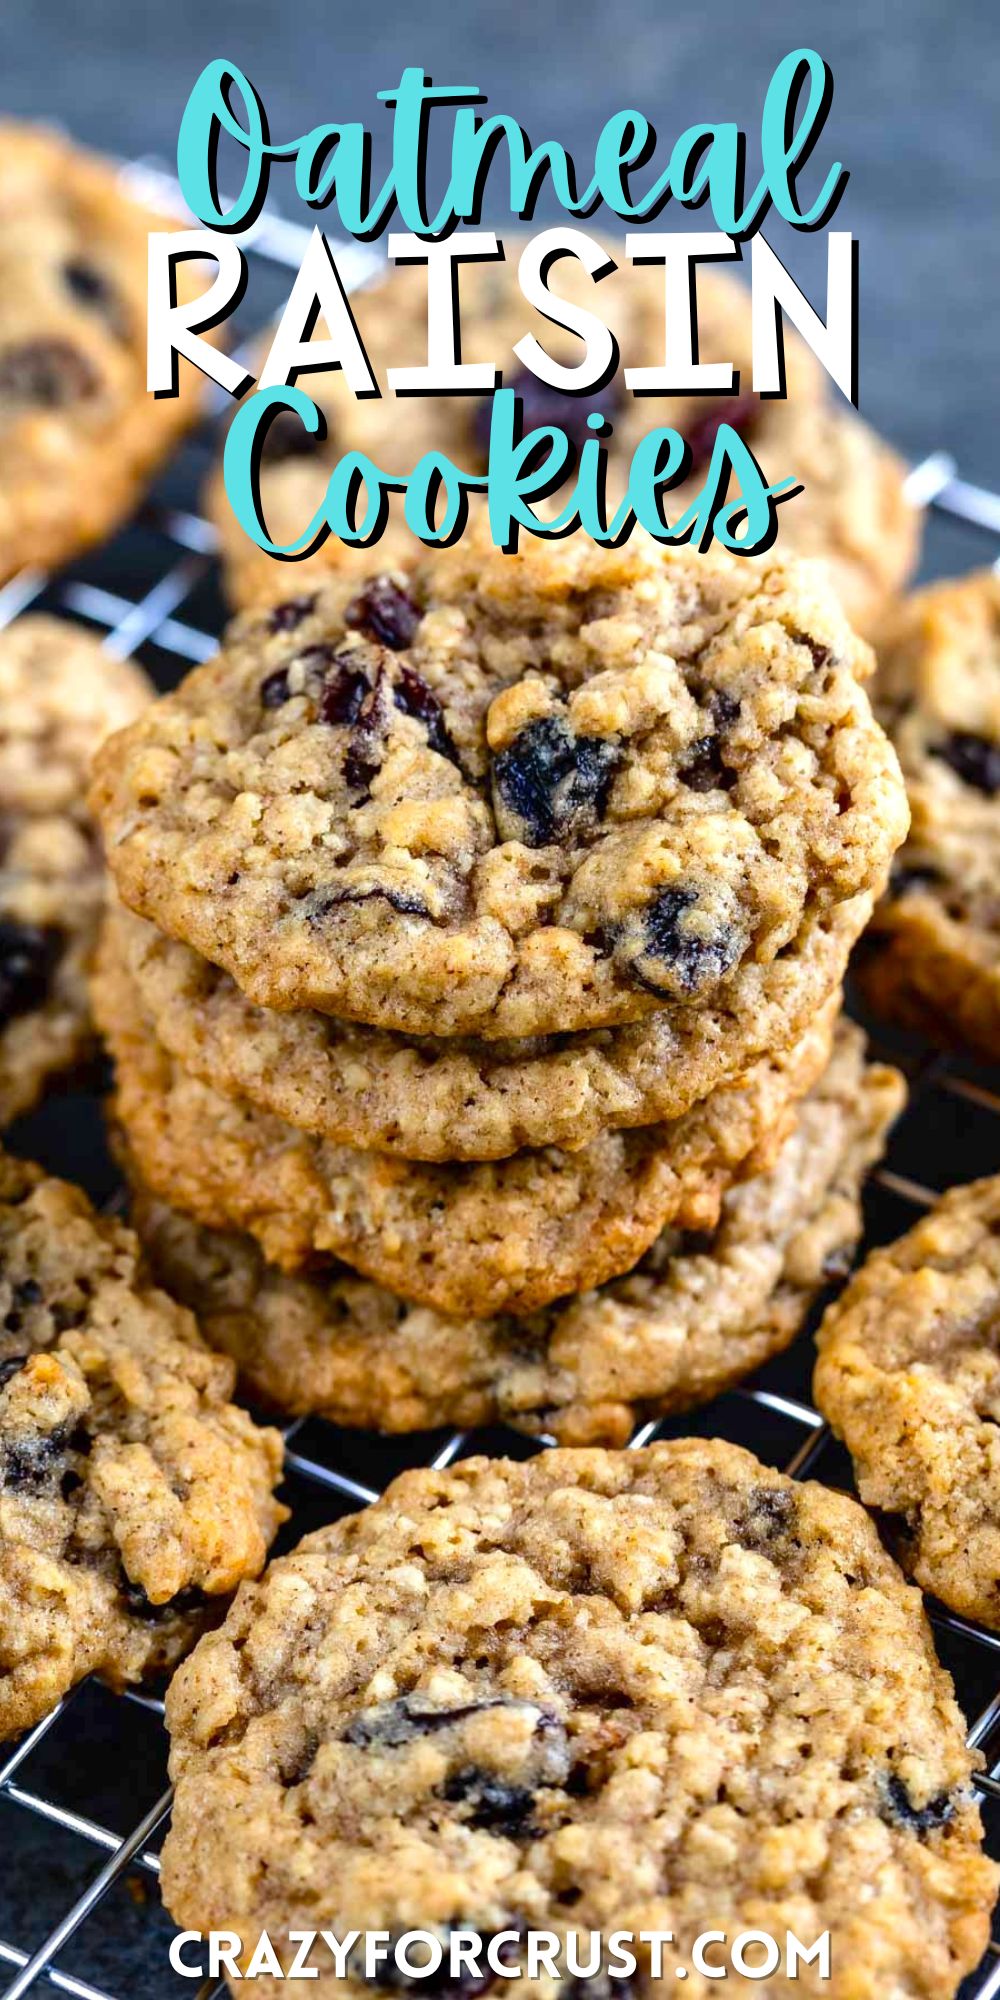 stacked oatmeal cookies with raisins on a drying rack with words on the image.